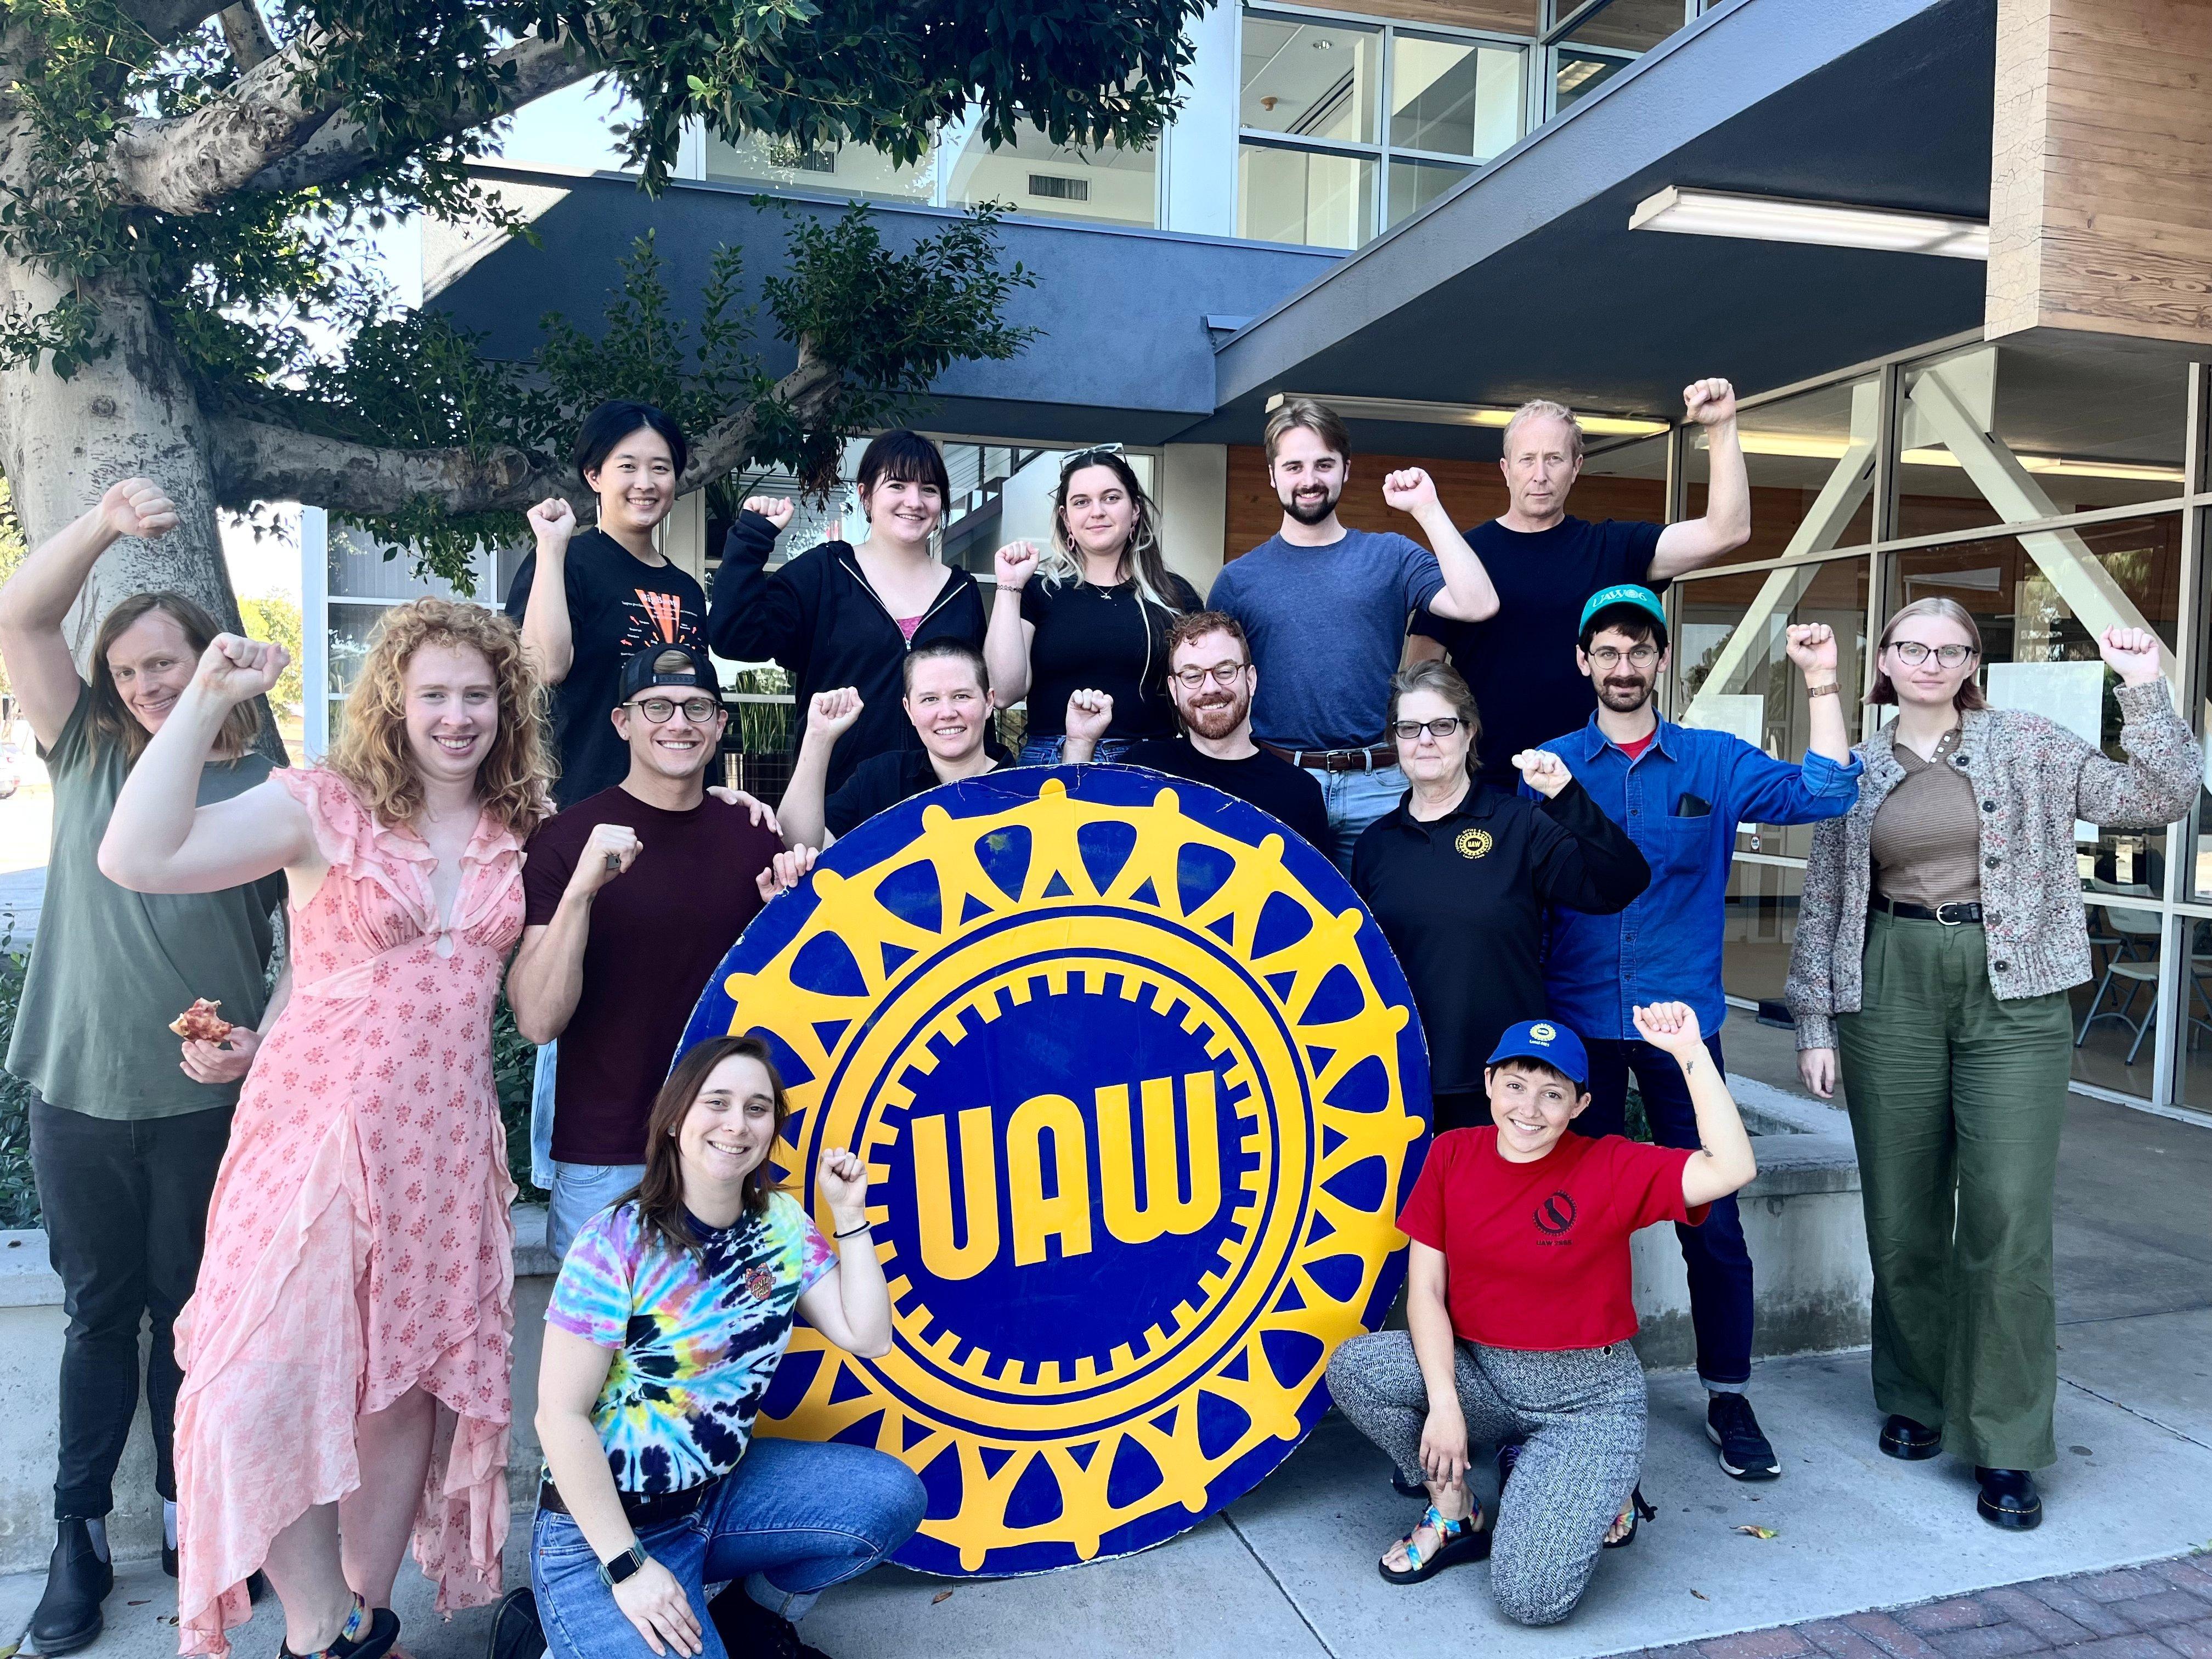 Fifteen UAW members posed for a photo with a large UAW wheel cutout